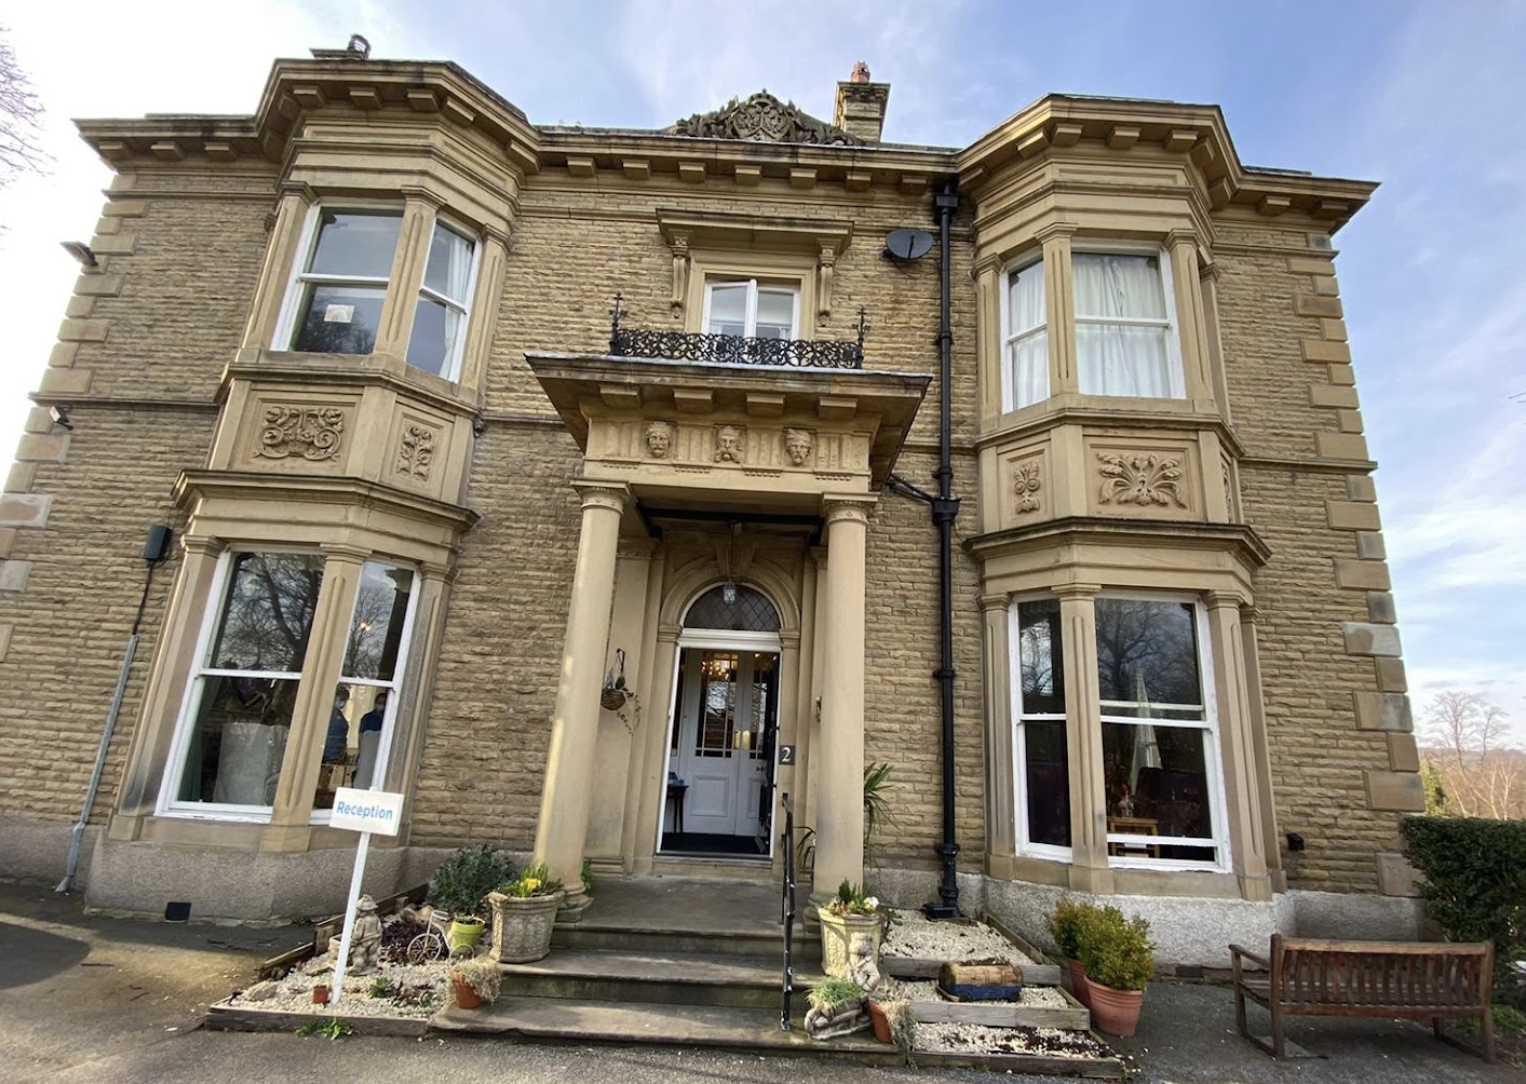 Exterior of Cleveland House care home in Huddersfield, West Yorkshire